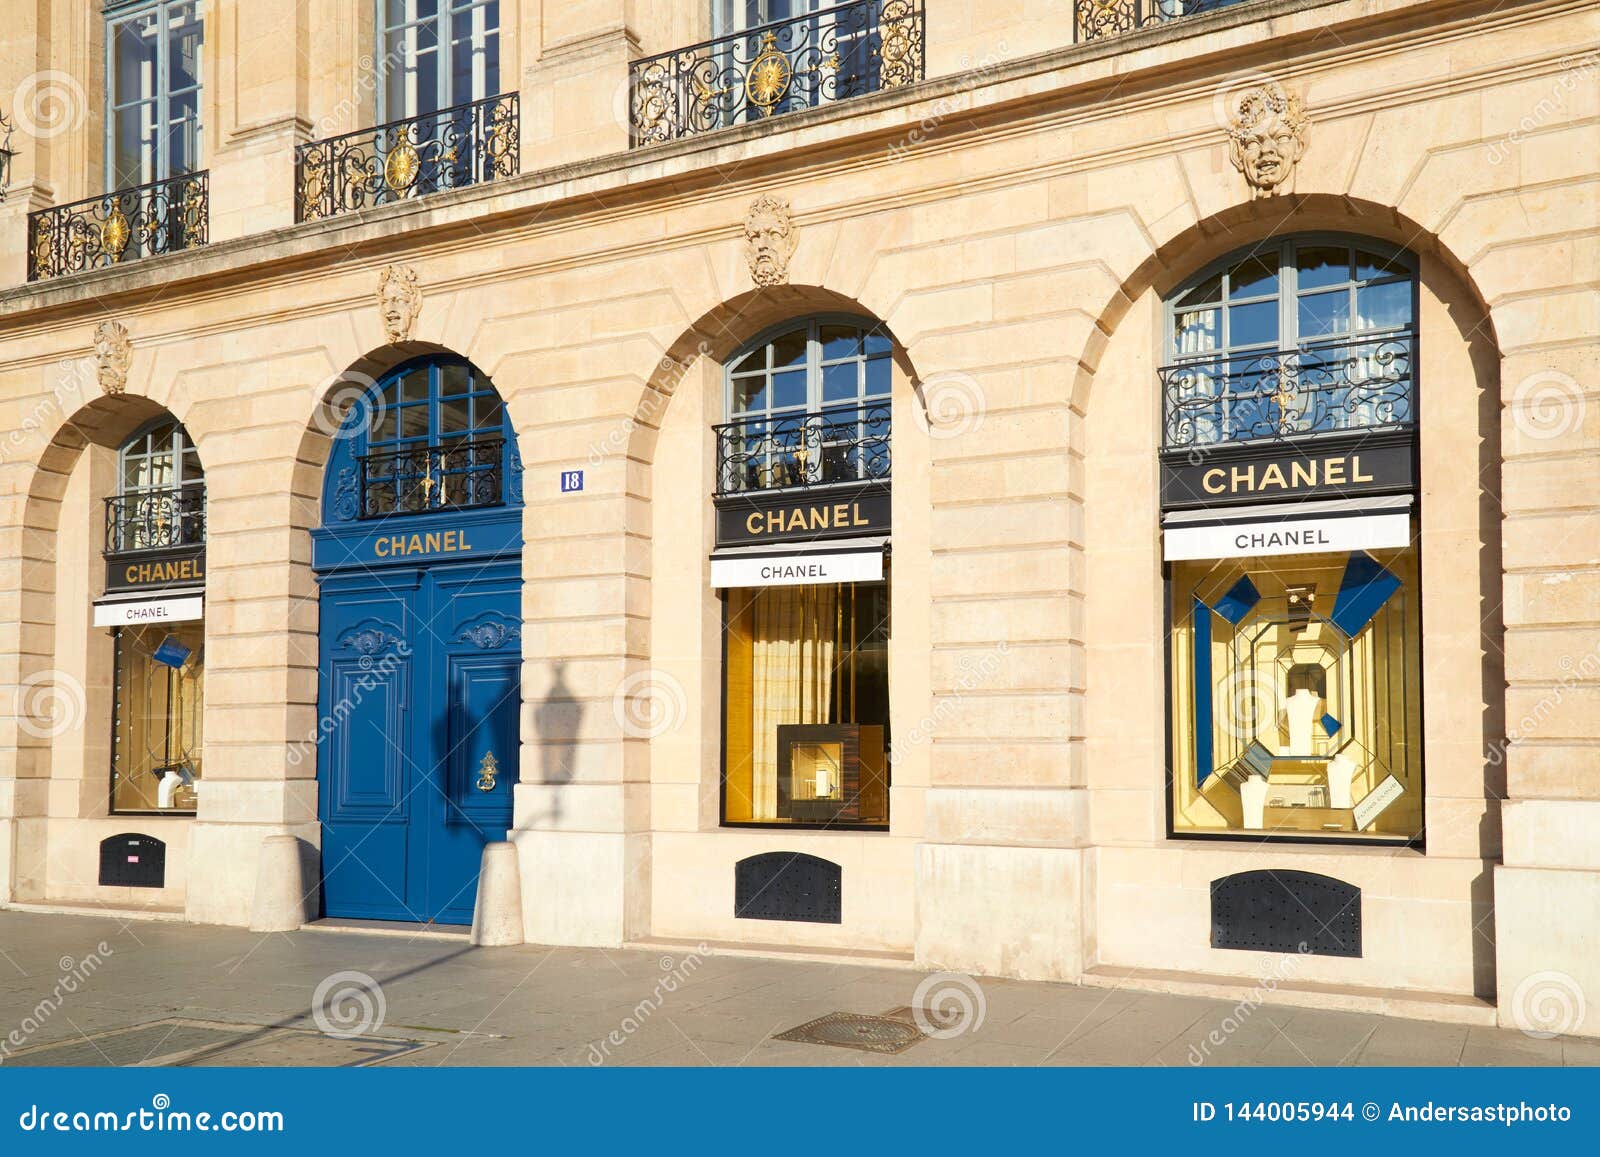 Chanel Luxury Store In Place Vendome In Paris, France Editorial Stock Image - Image of clothing ...